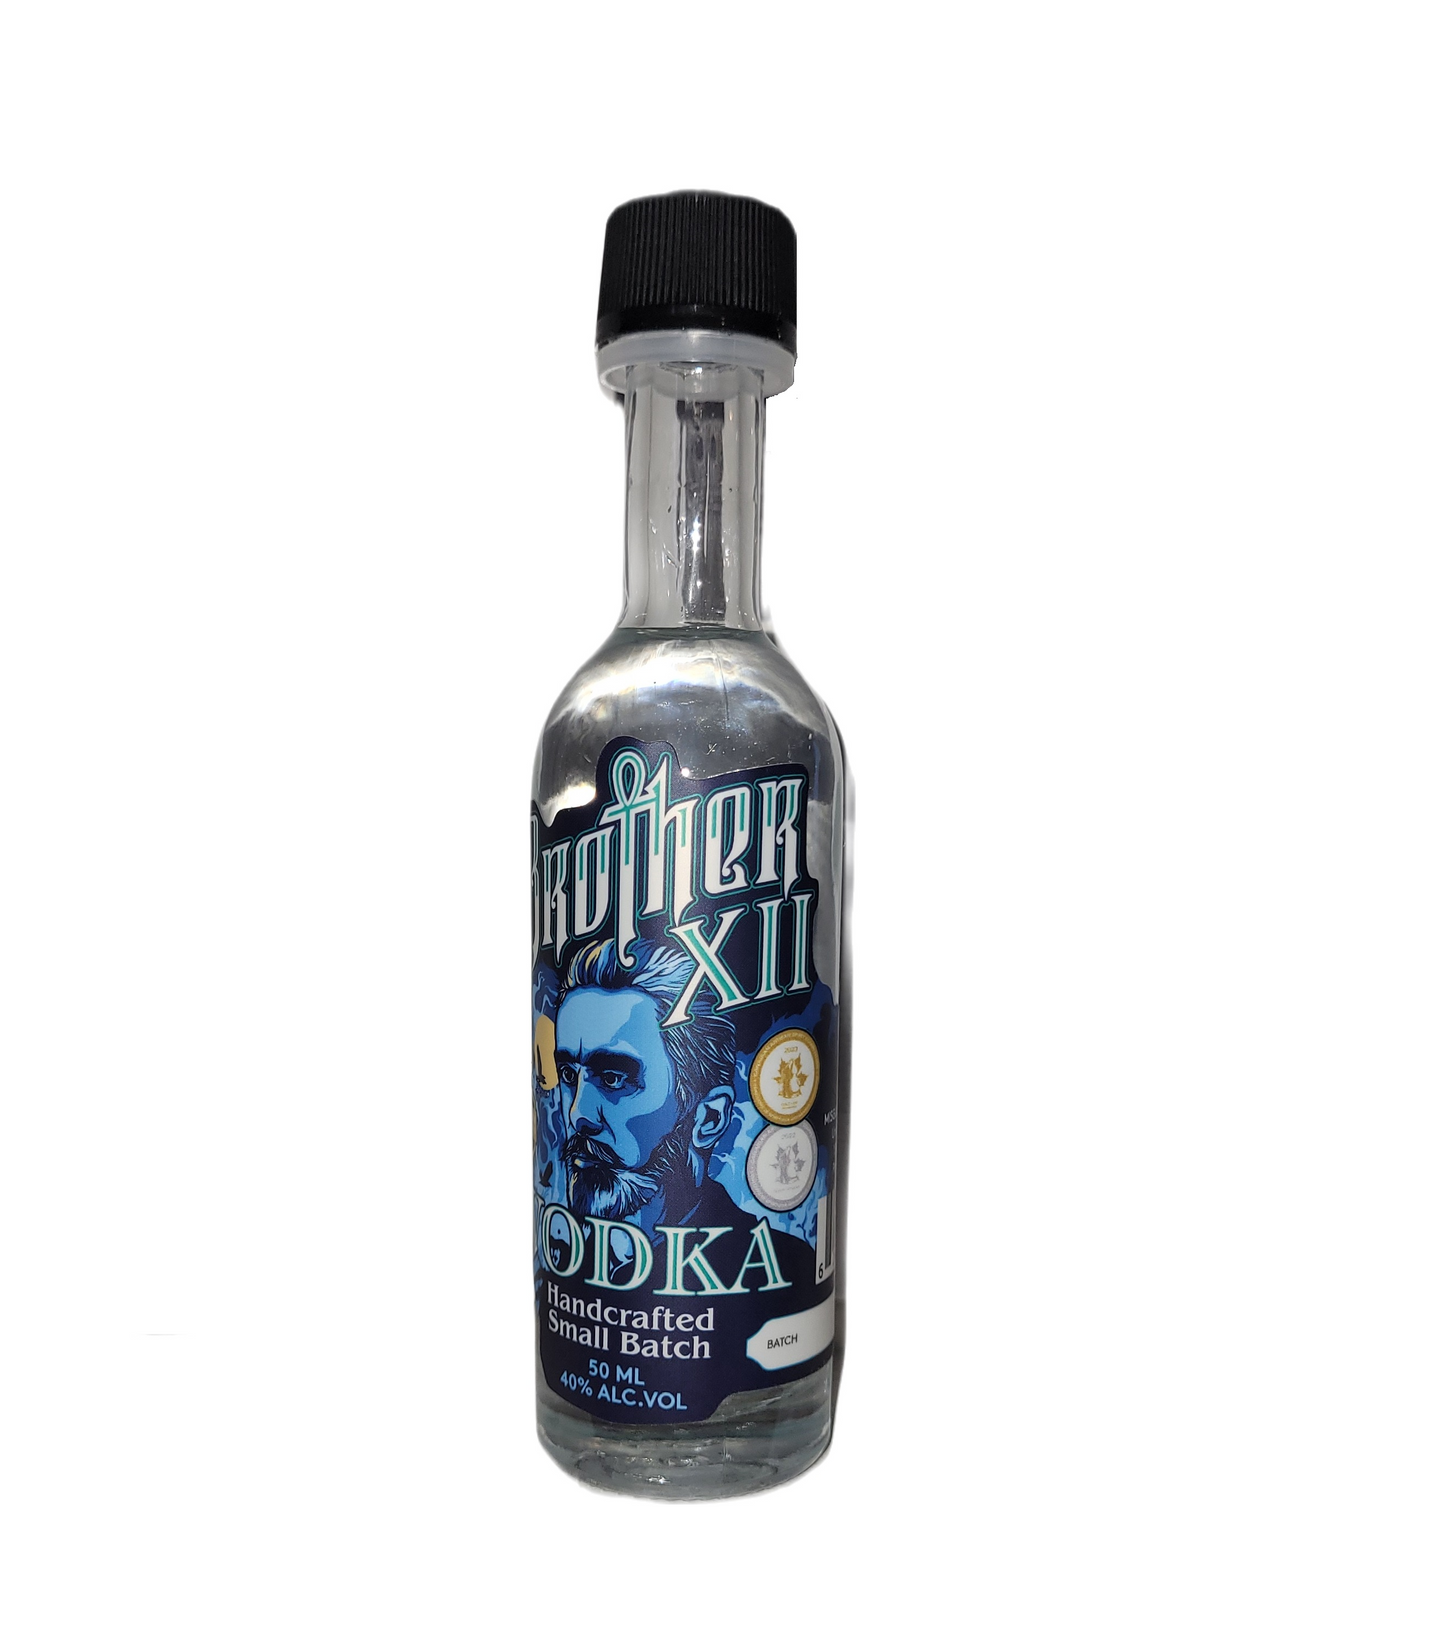 Brother XII Vodka